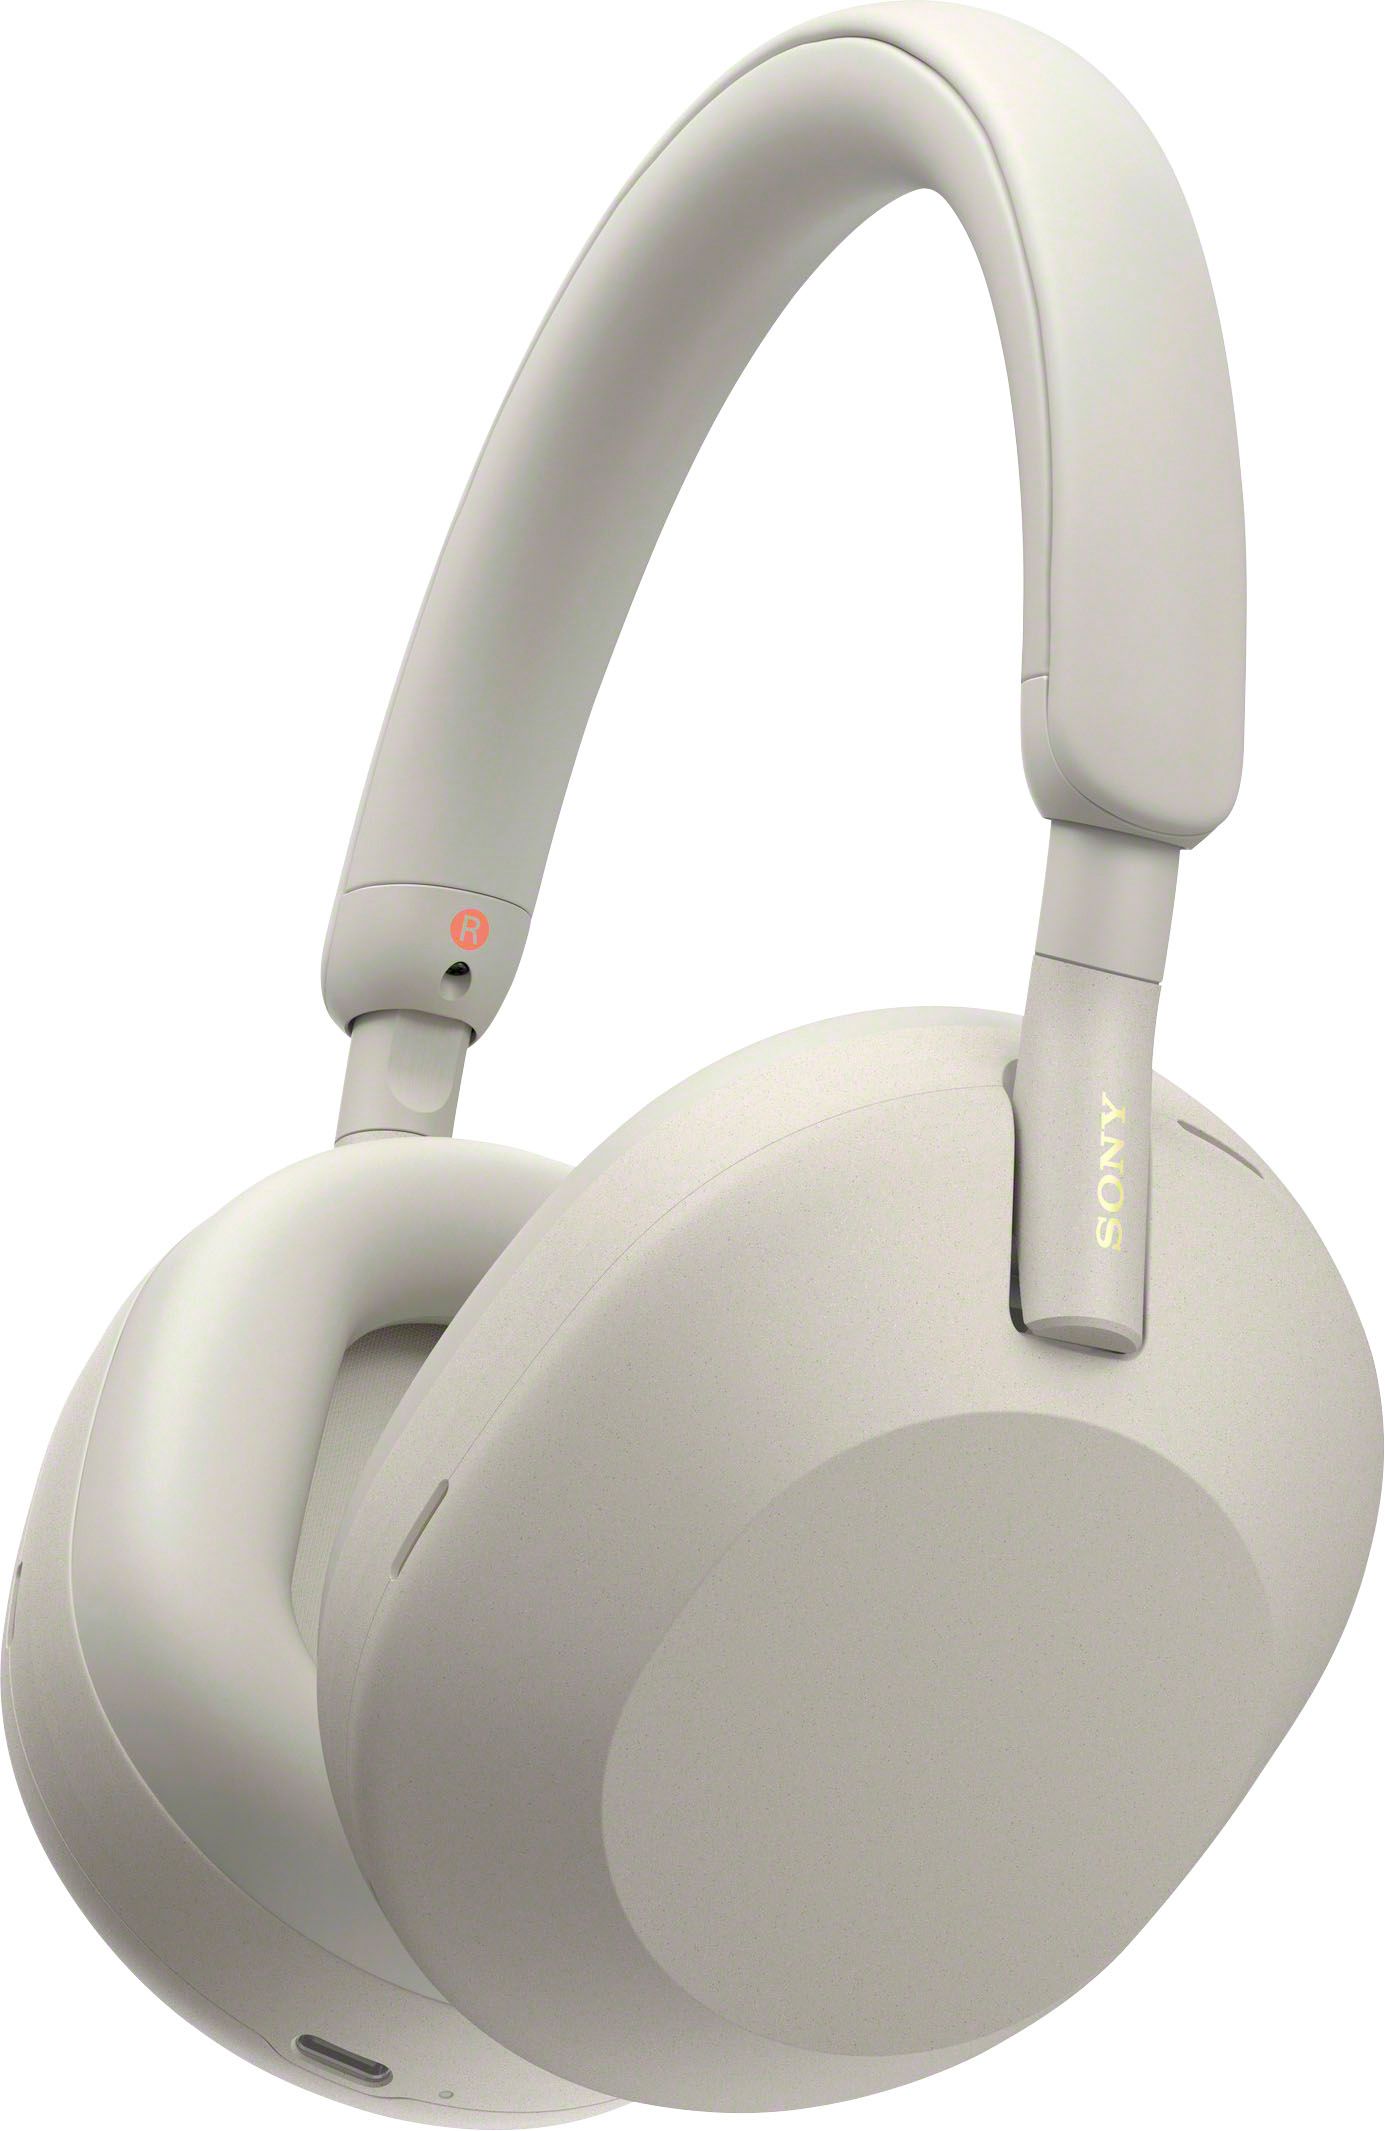 Sony WH-1000XM5 Wireless Noise-Canceling Over-the-Ear Headphones Silver WH-1000XM5/S - Best Buy | Best Buy U.S.